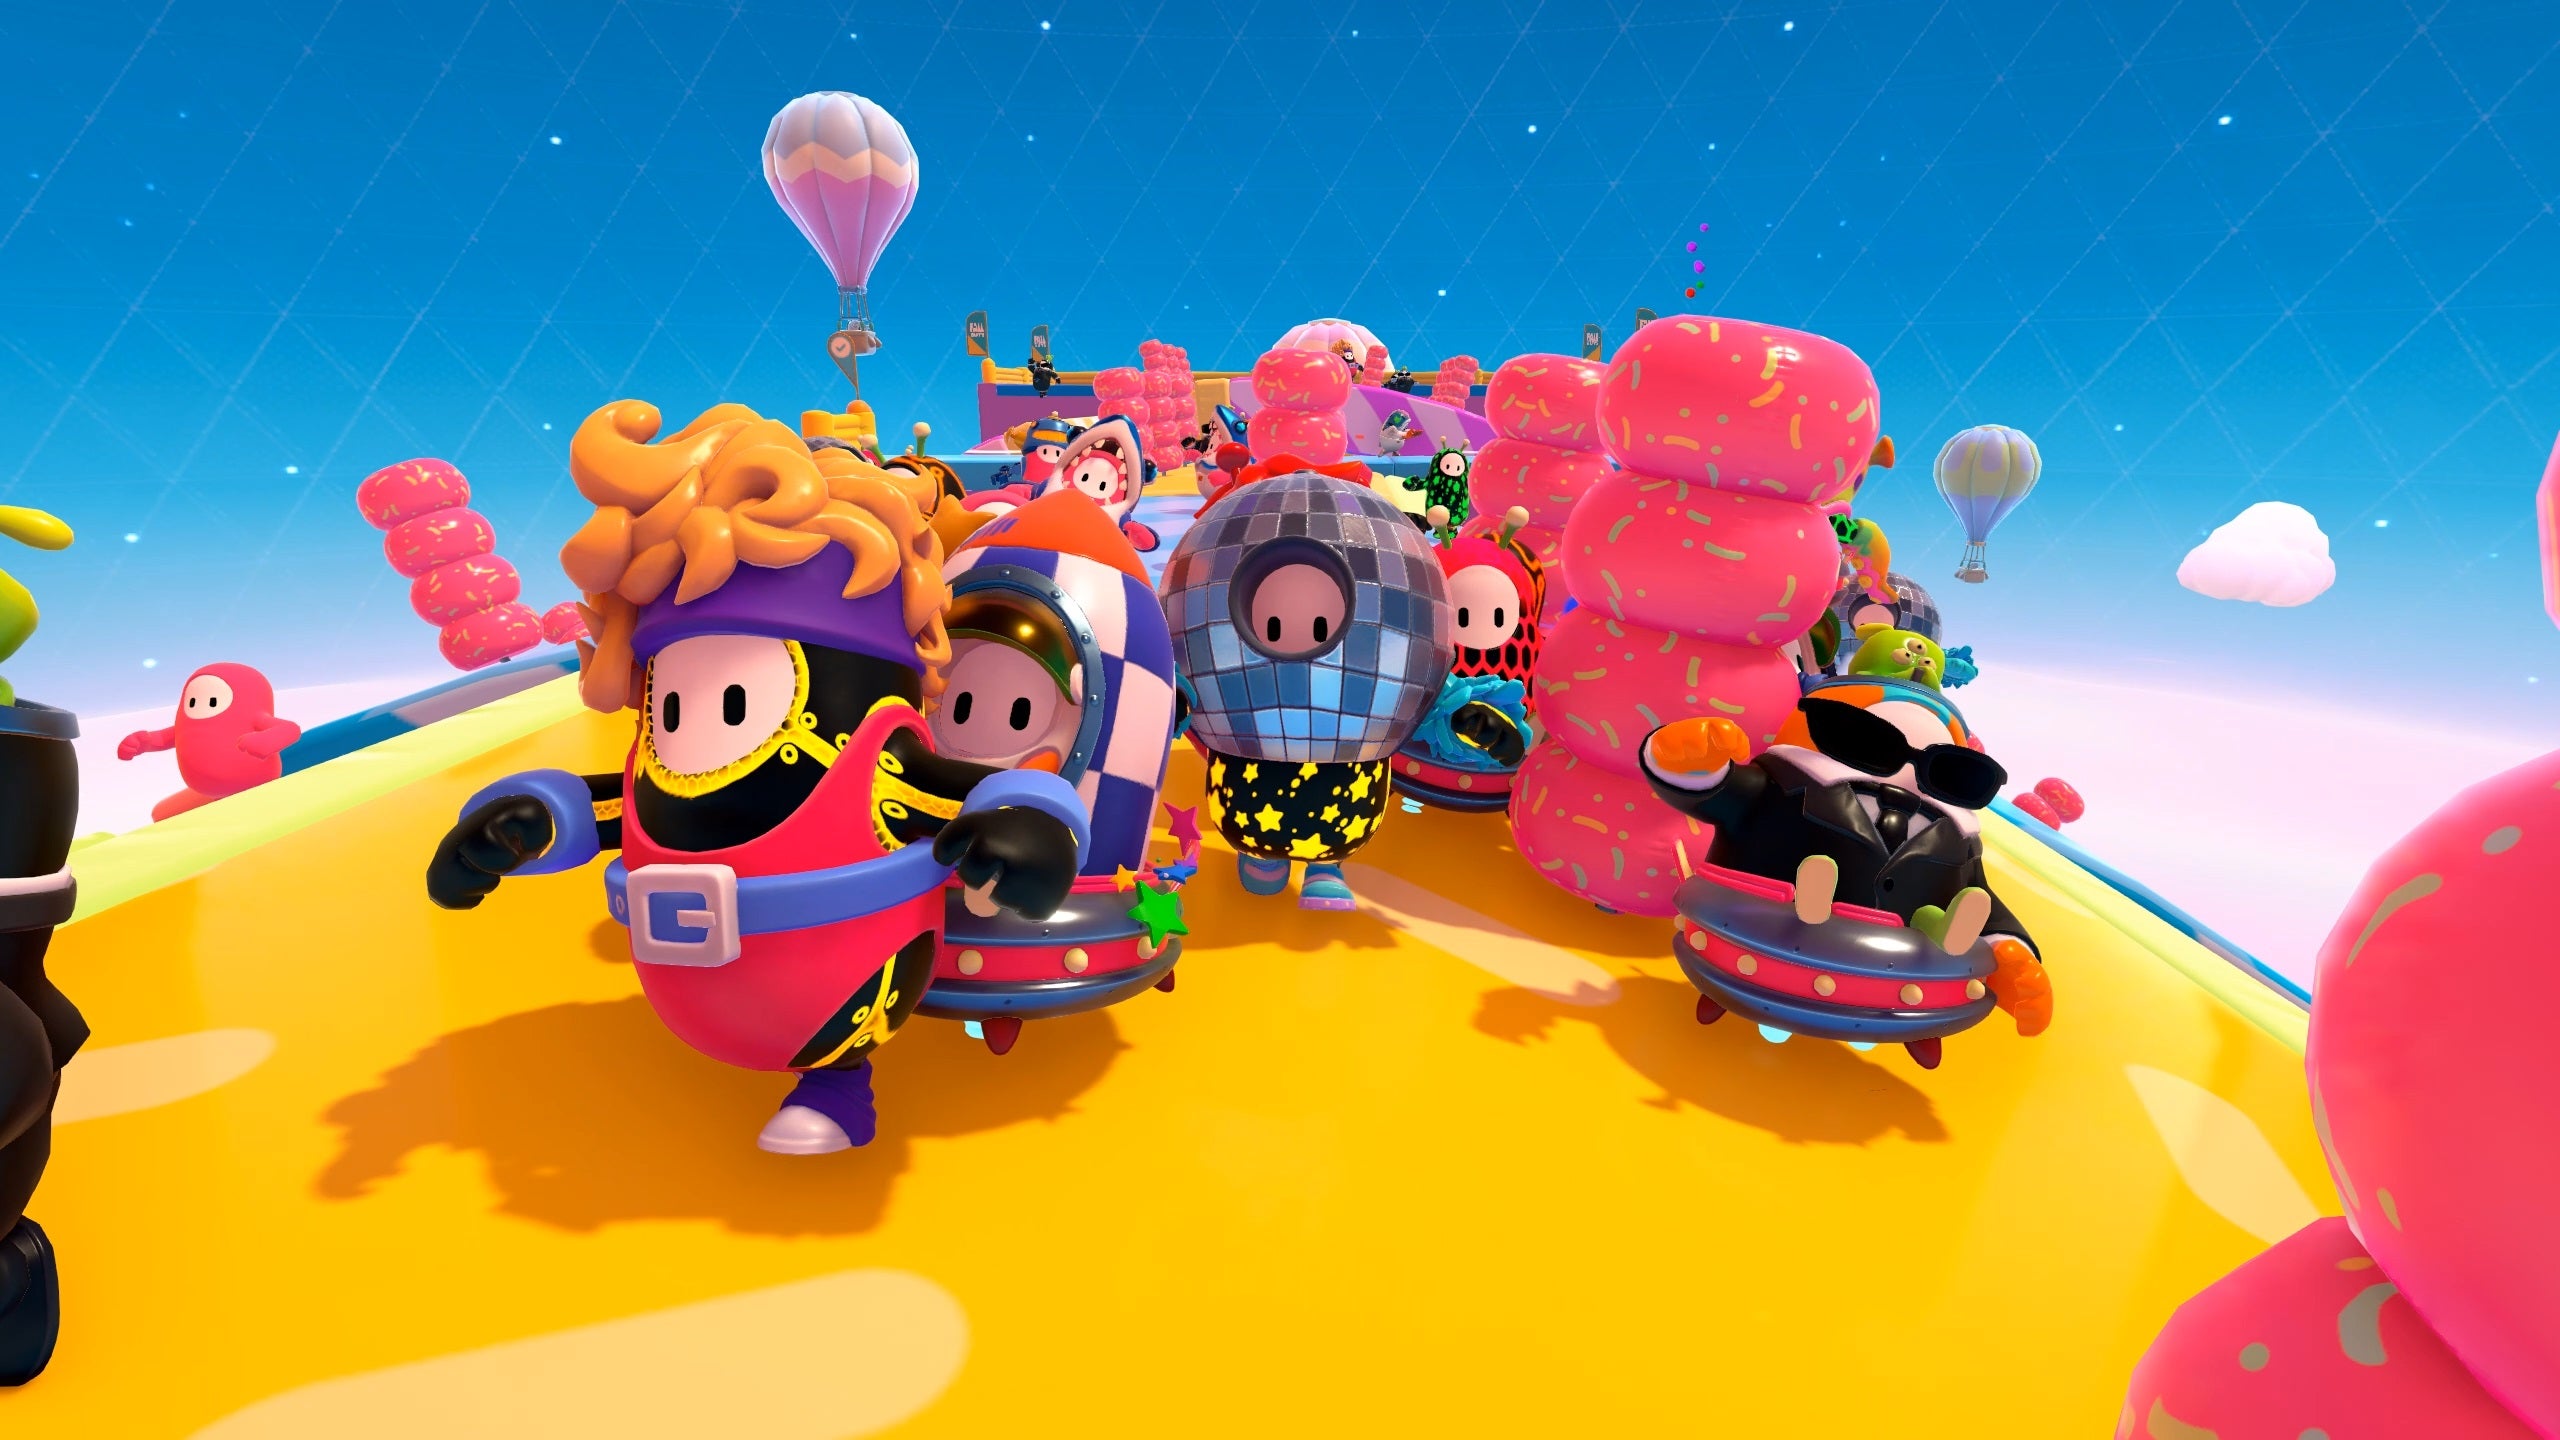 Several Fall Guys race along the new Roll On level, a large, rotating cylinder. They're all wearing new 80's inspired costumes such as a disco ball hat and a pink leotard with a belt and headband.